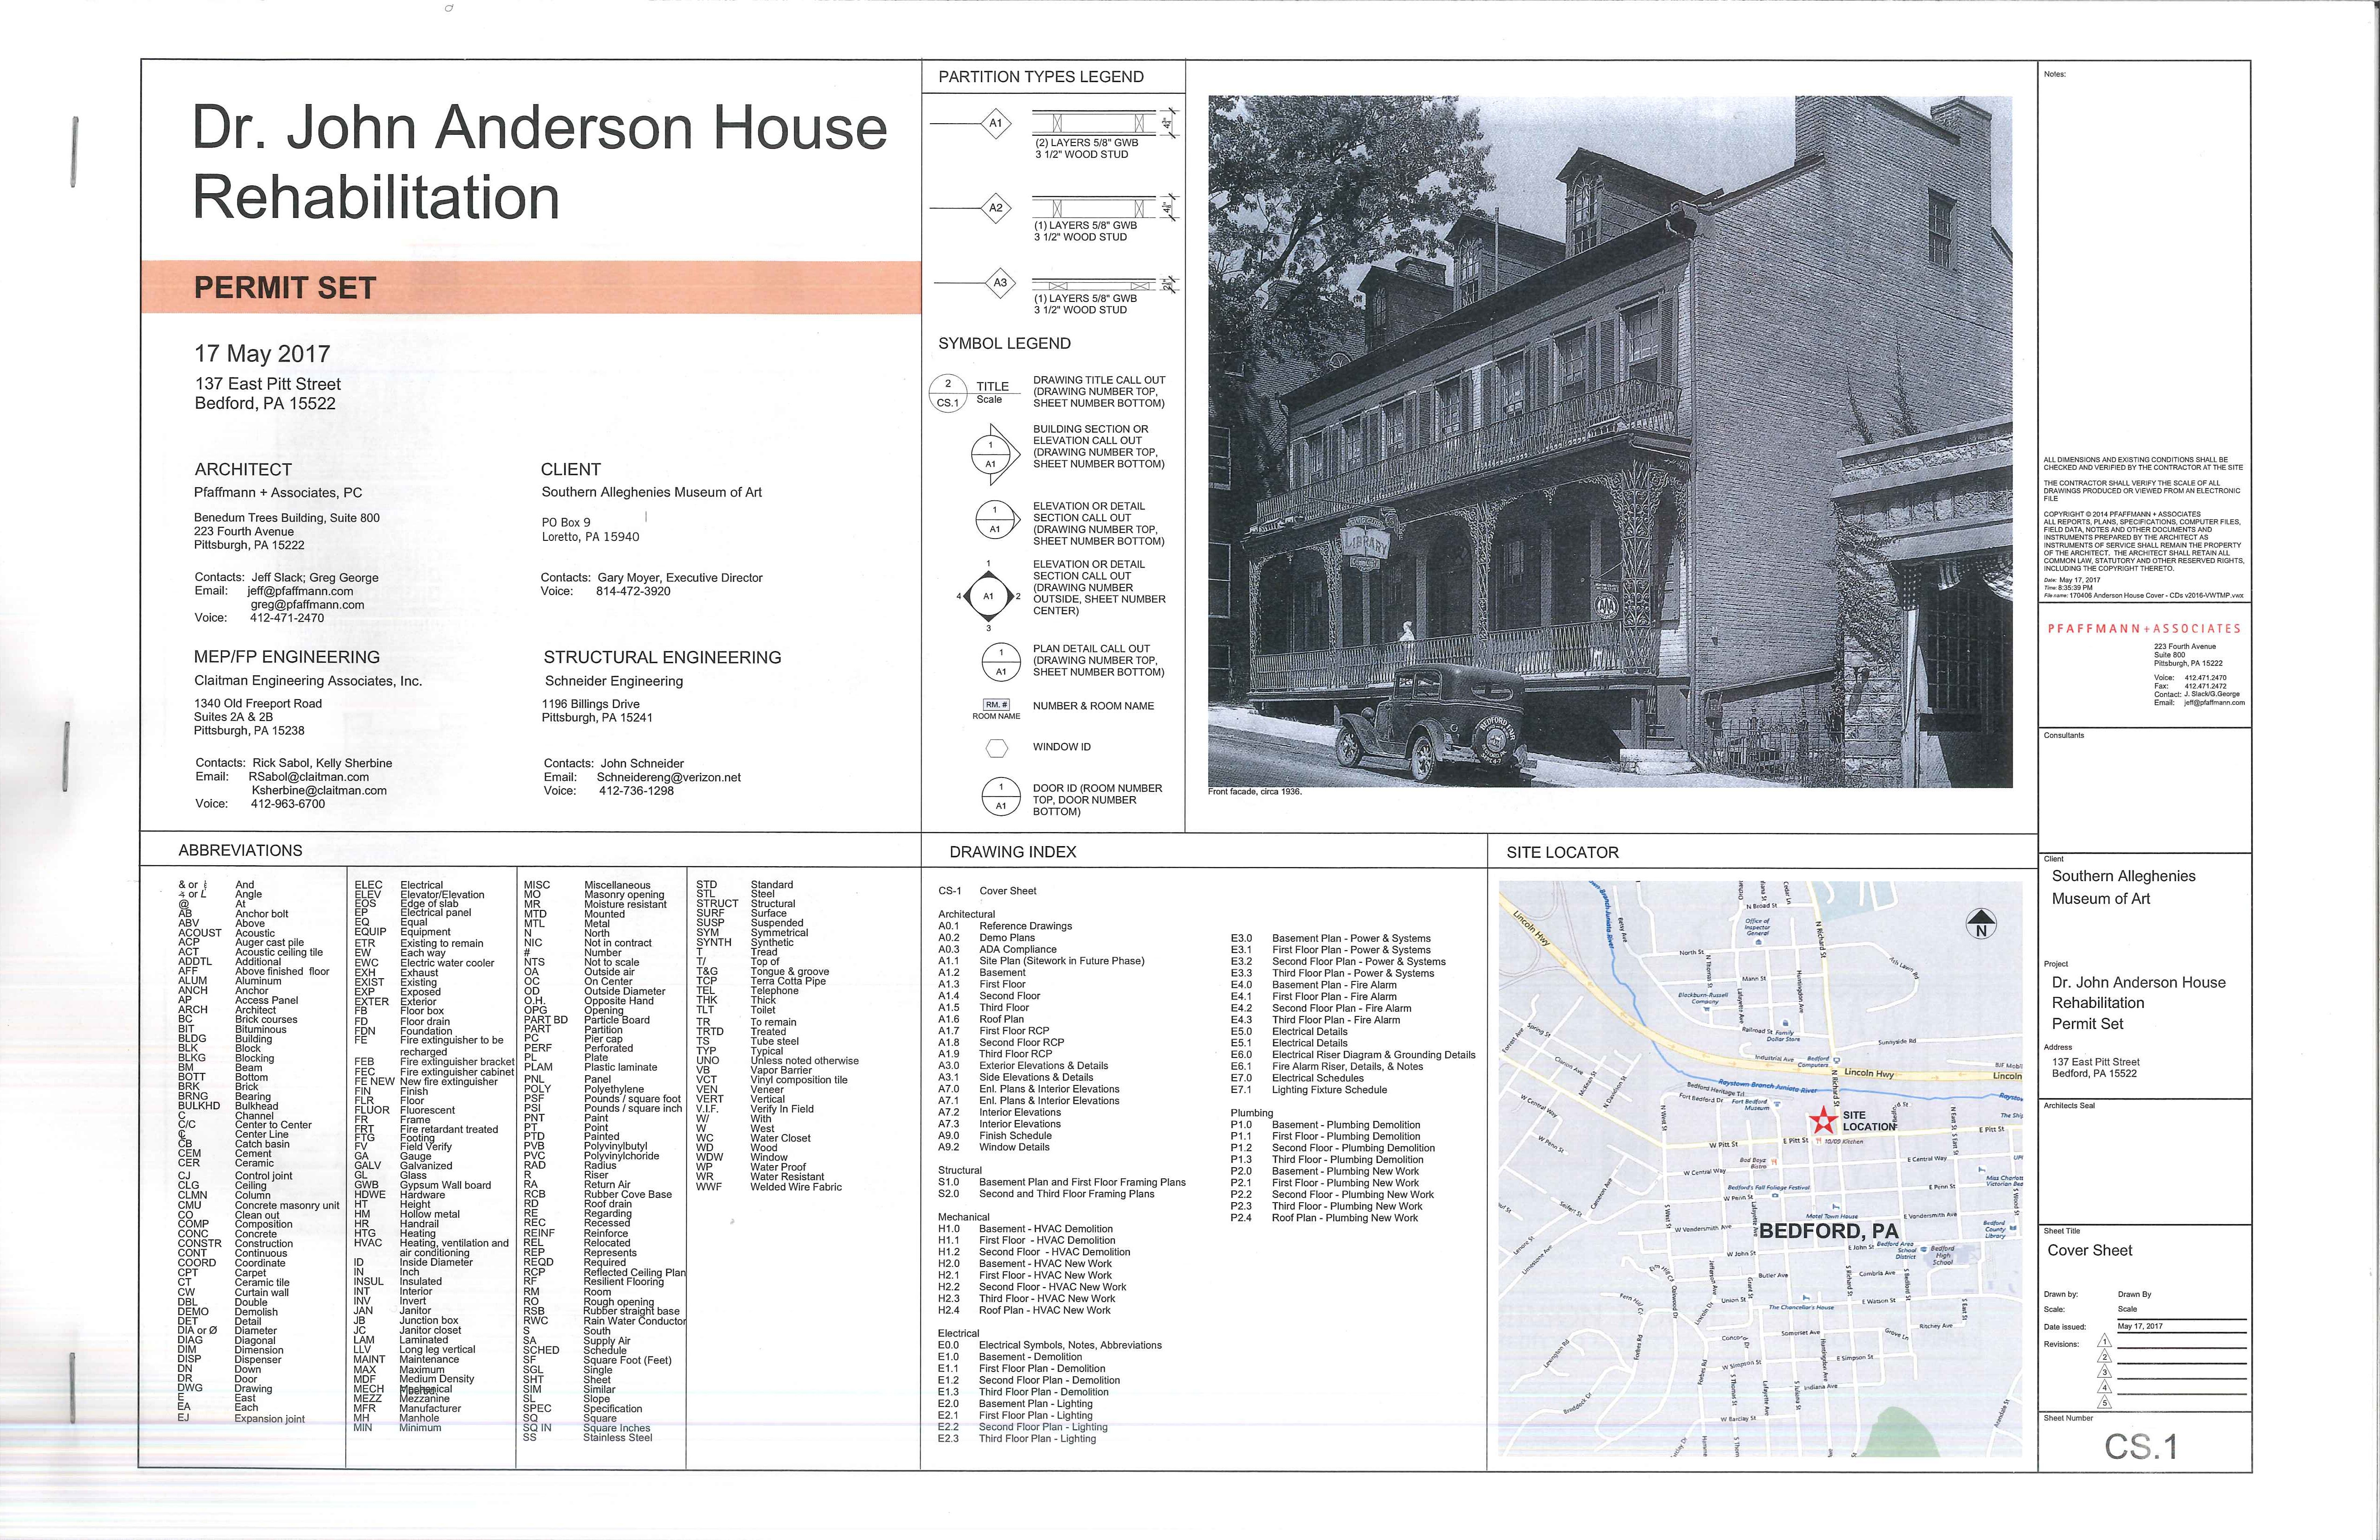 This image shows the front cover of the permit set of plans for the Anderson House rehabilitation.